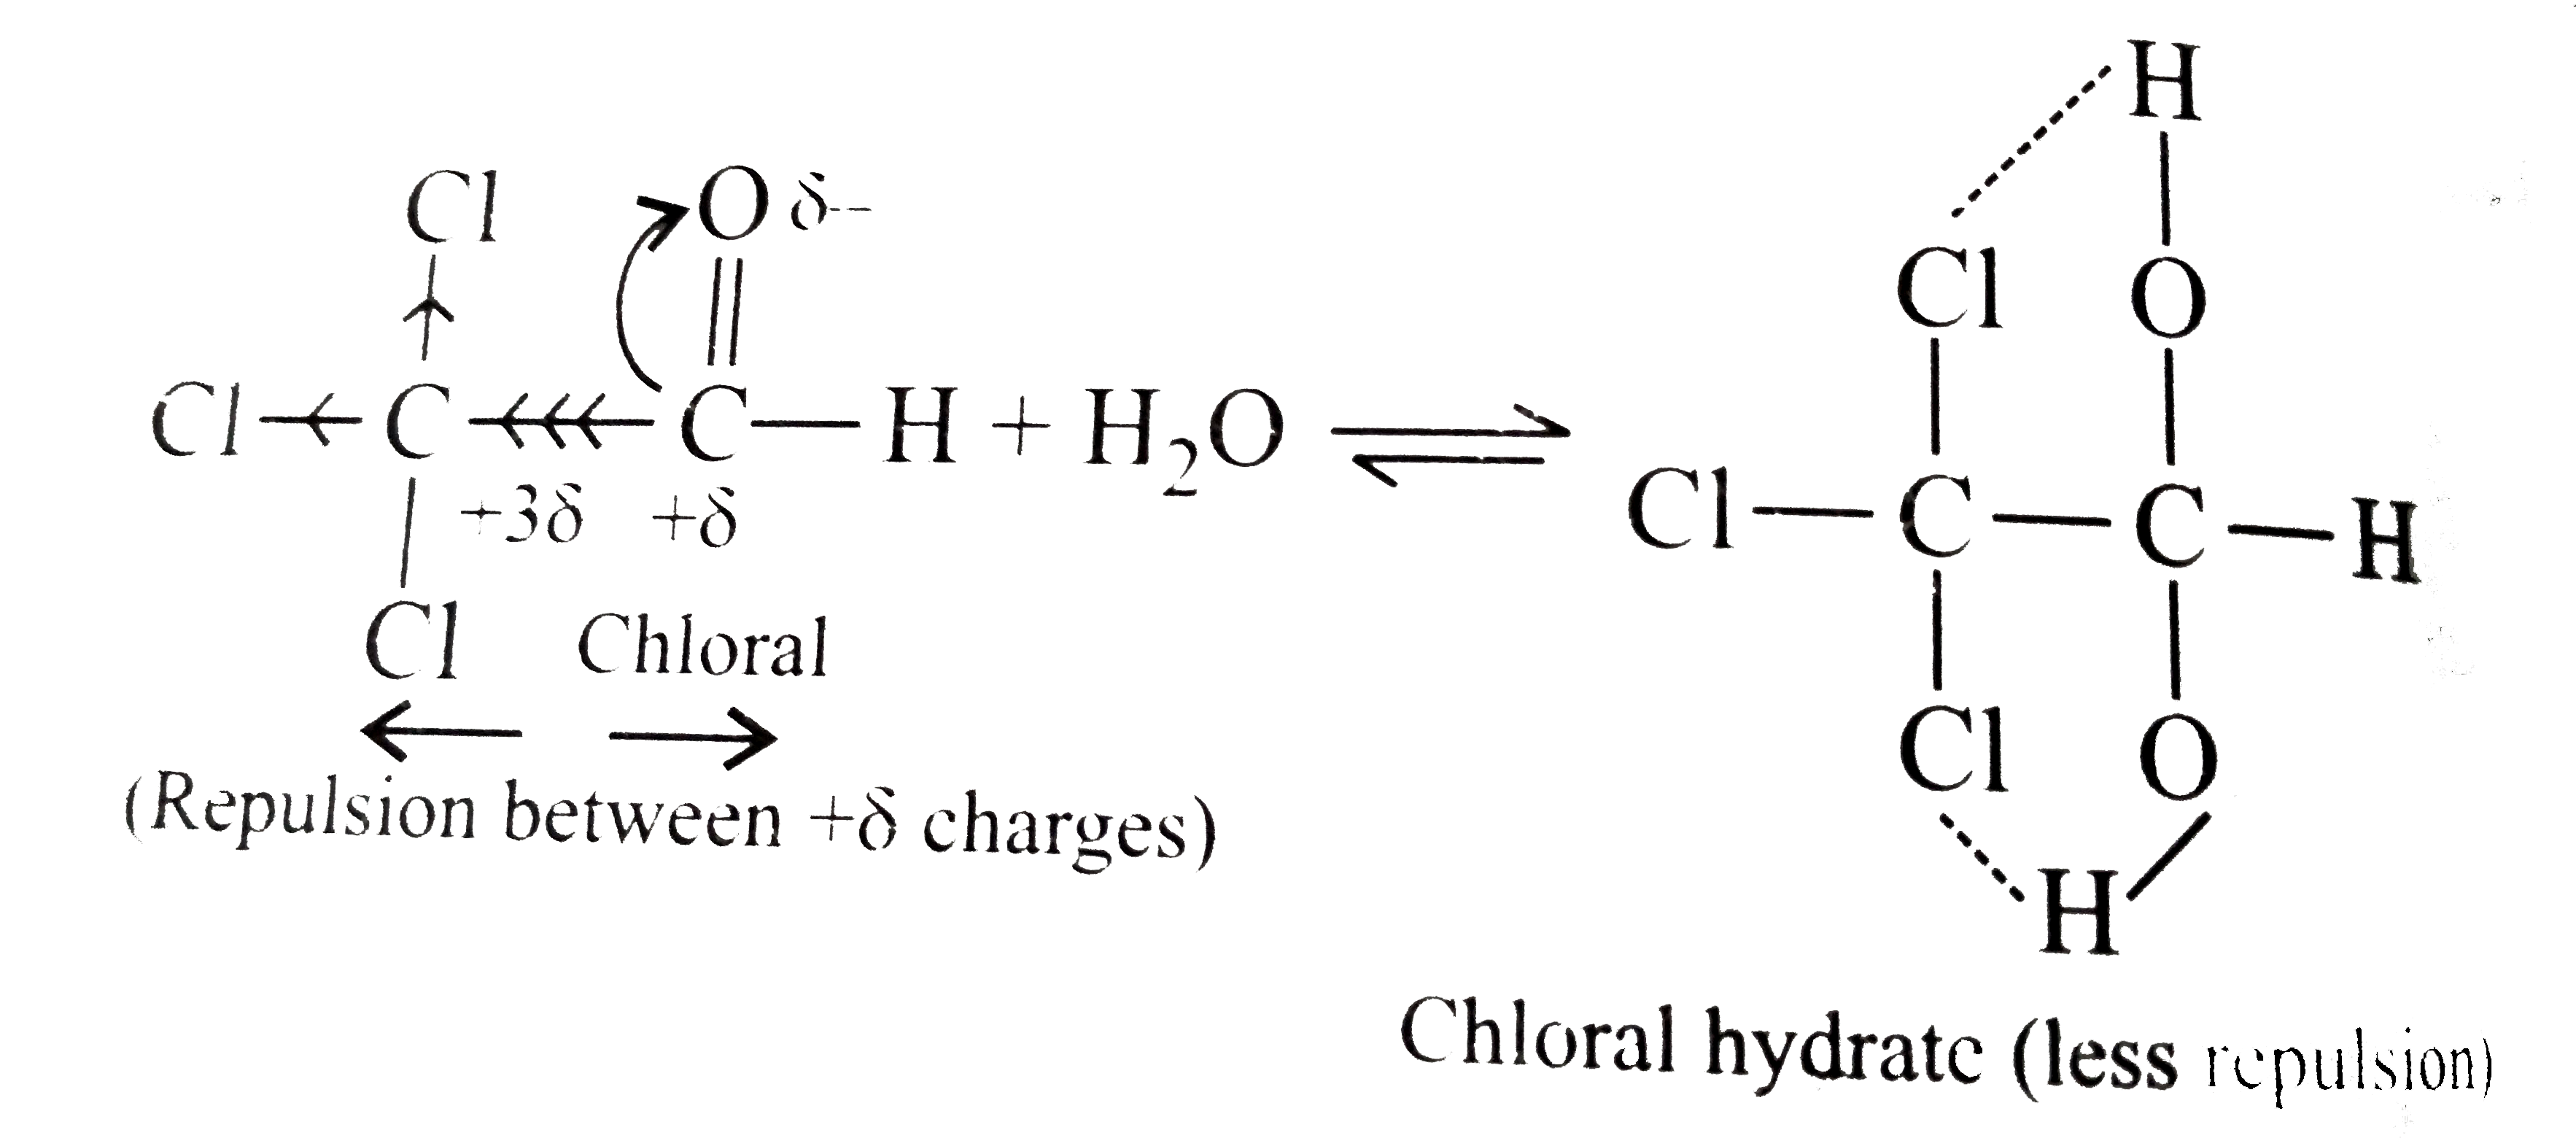 Explain A Chloral Normally Exists As Chloral Hydrate And Is Us